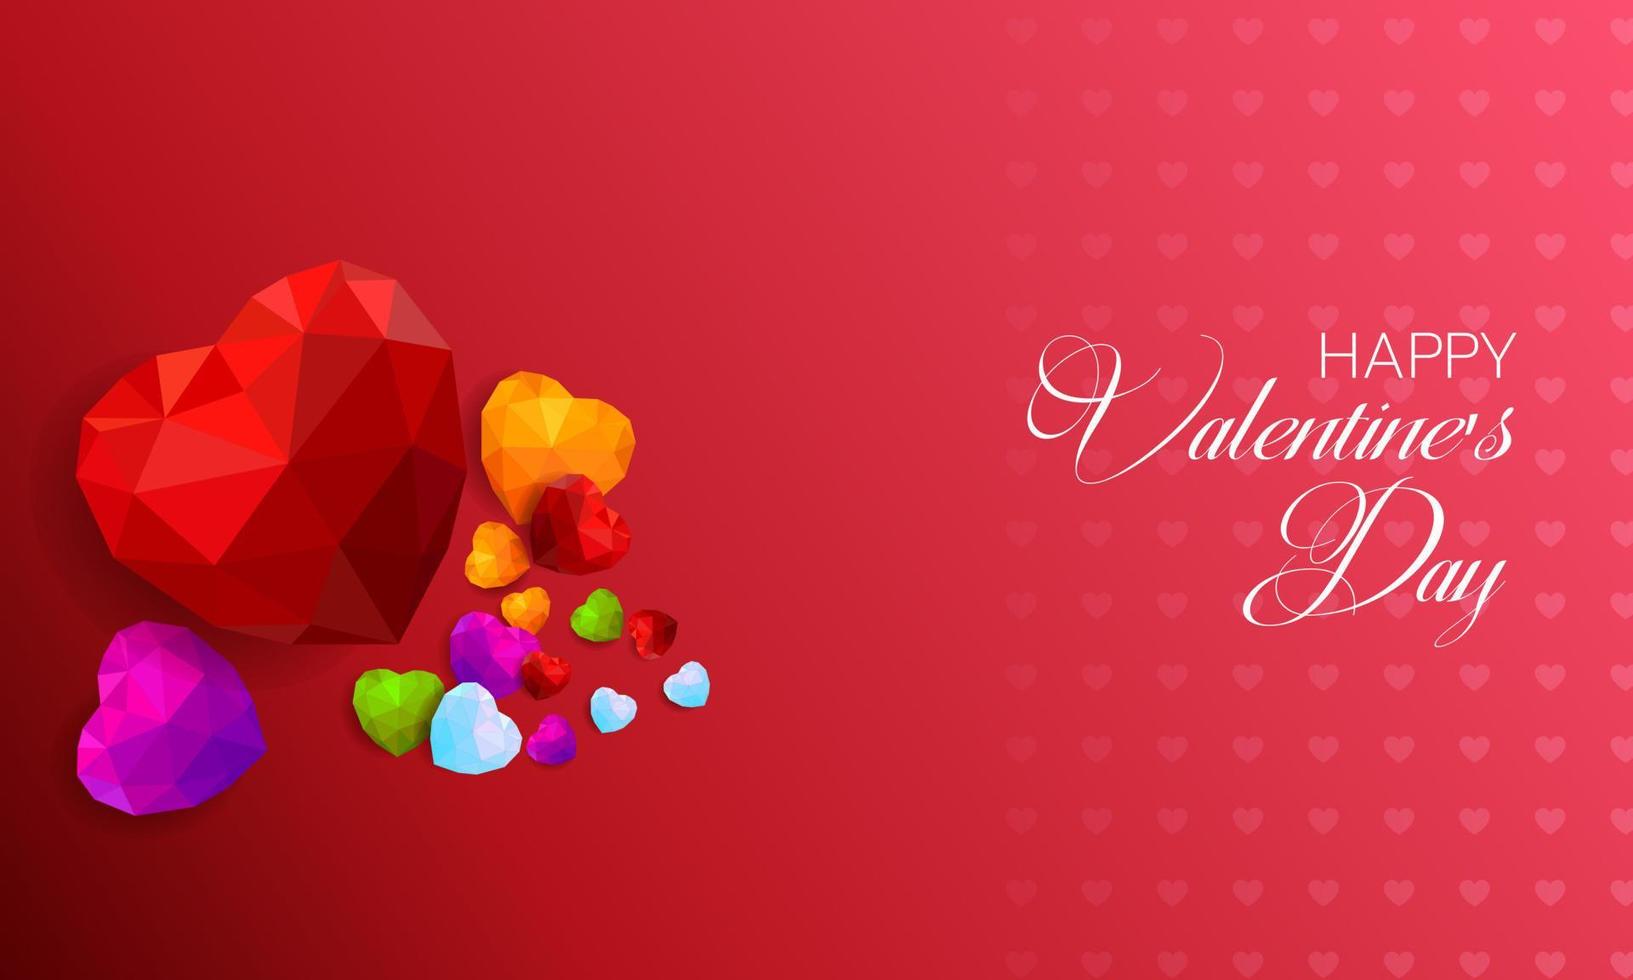 Happy Valentines Day celebration holidays background.design for greeting cards and poster template vector illustration